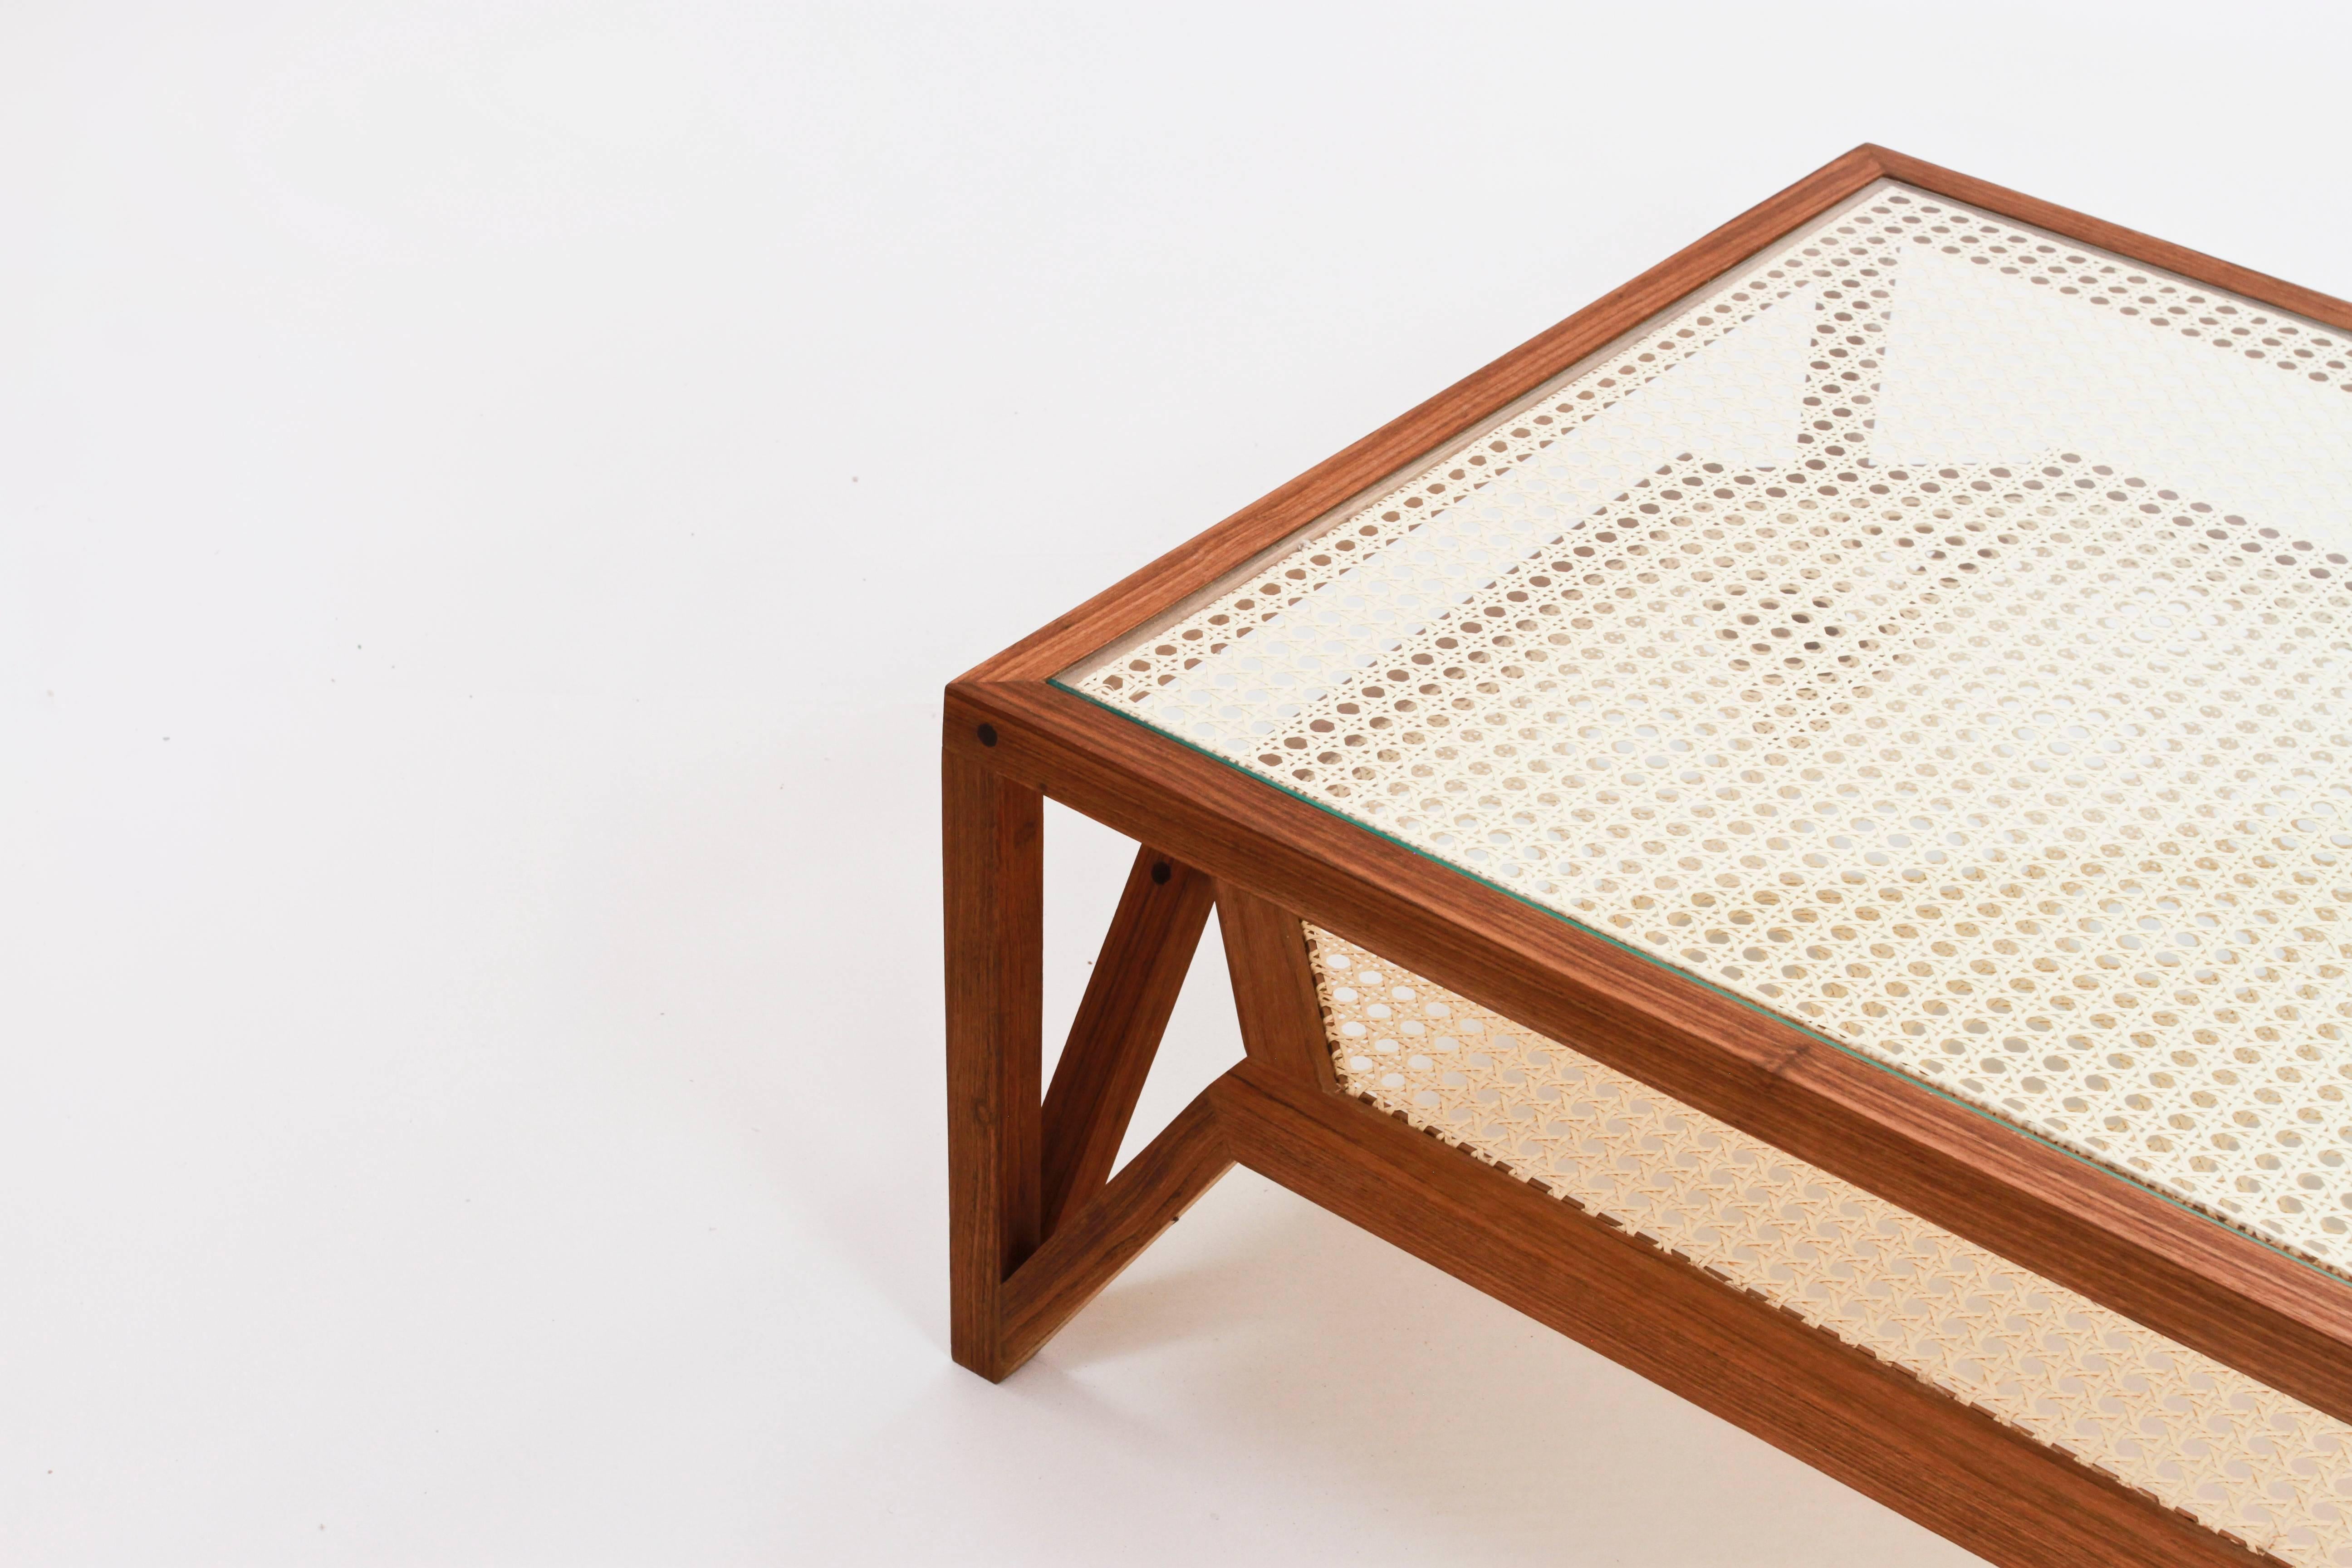 Brazilian Coffee Table in Hardwood and Woven Cane. Contemporary Design by O Formigueiro. For Sale